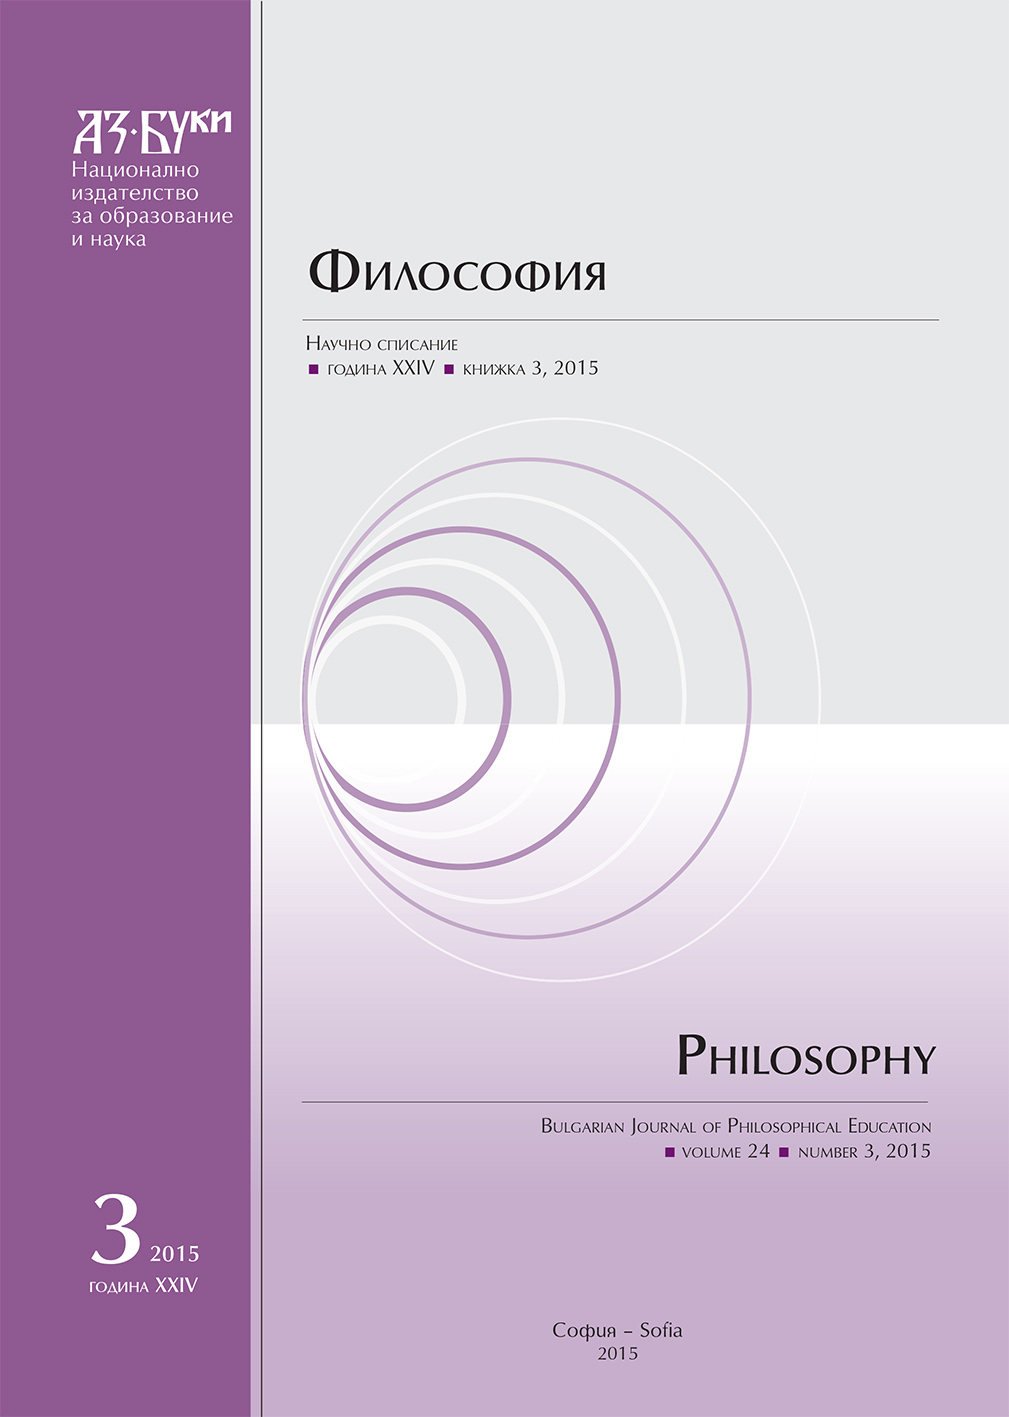 Christian Ideas on Freedom of Man and Moral Choice According to the Representatives of Russian Religious Philosophy (F. Dostoevski, N. Berdyaev and B. Visheslavtsev) Cover Image